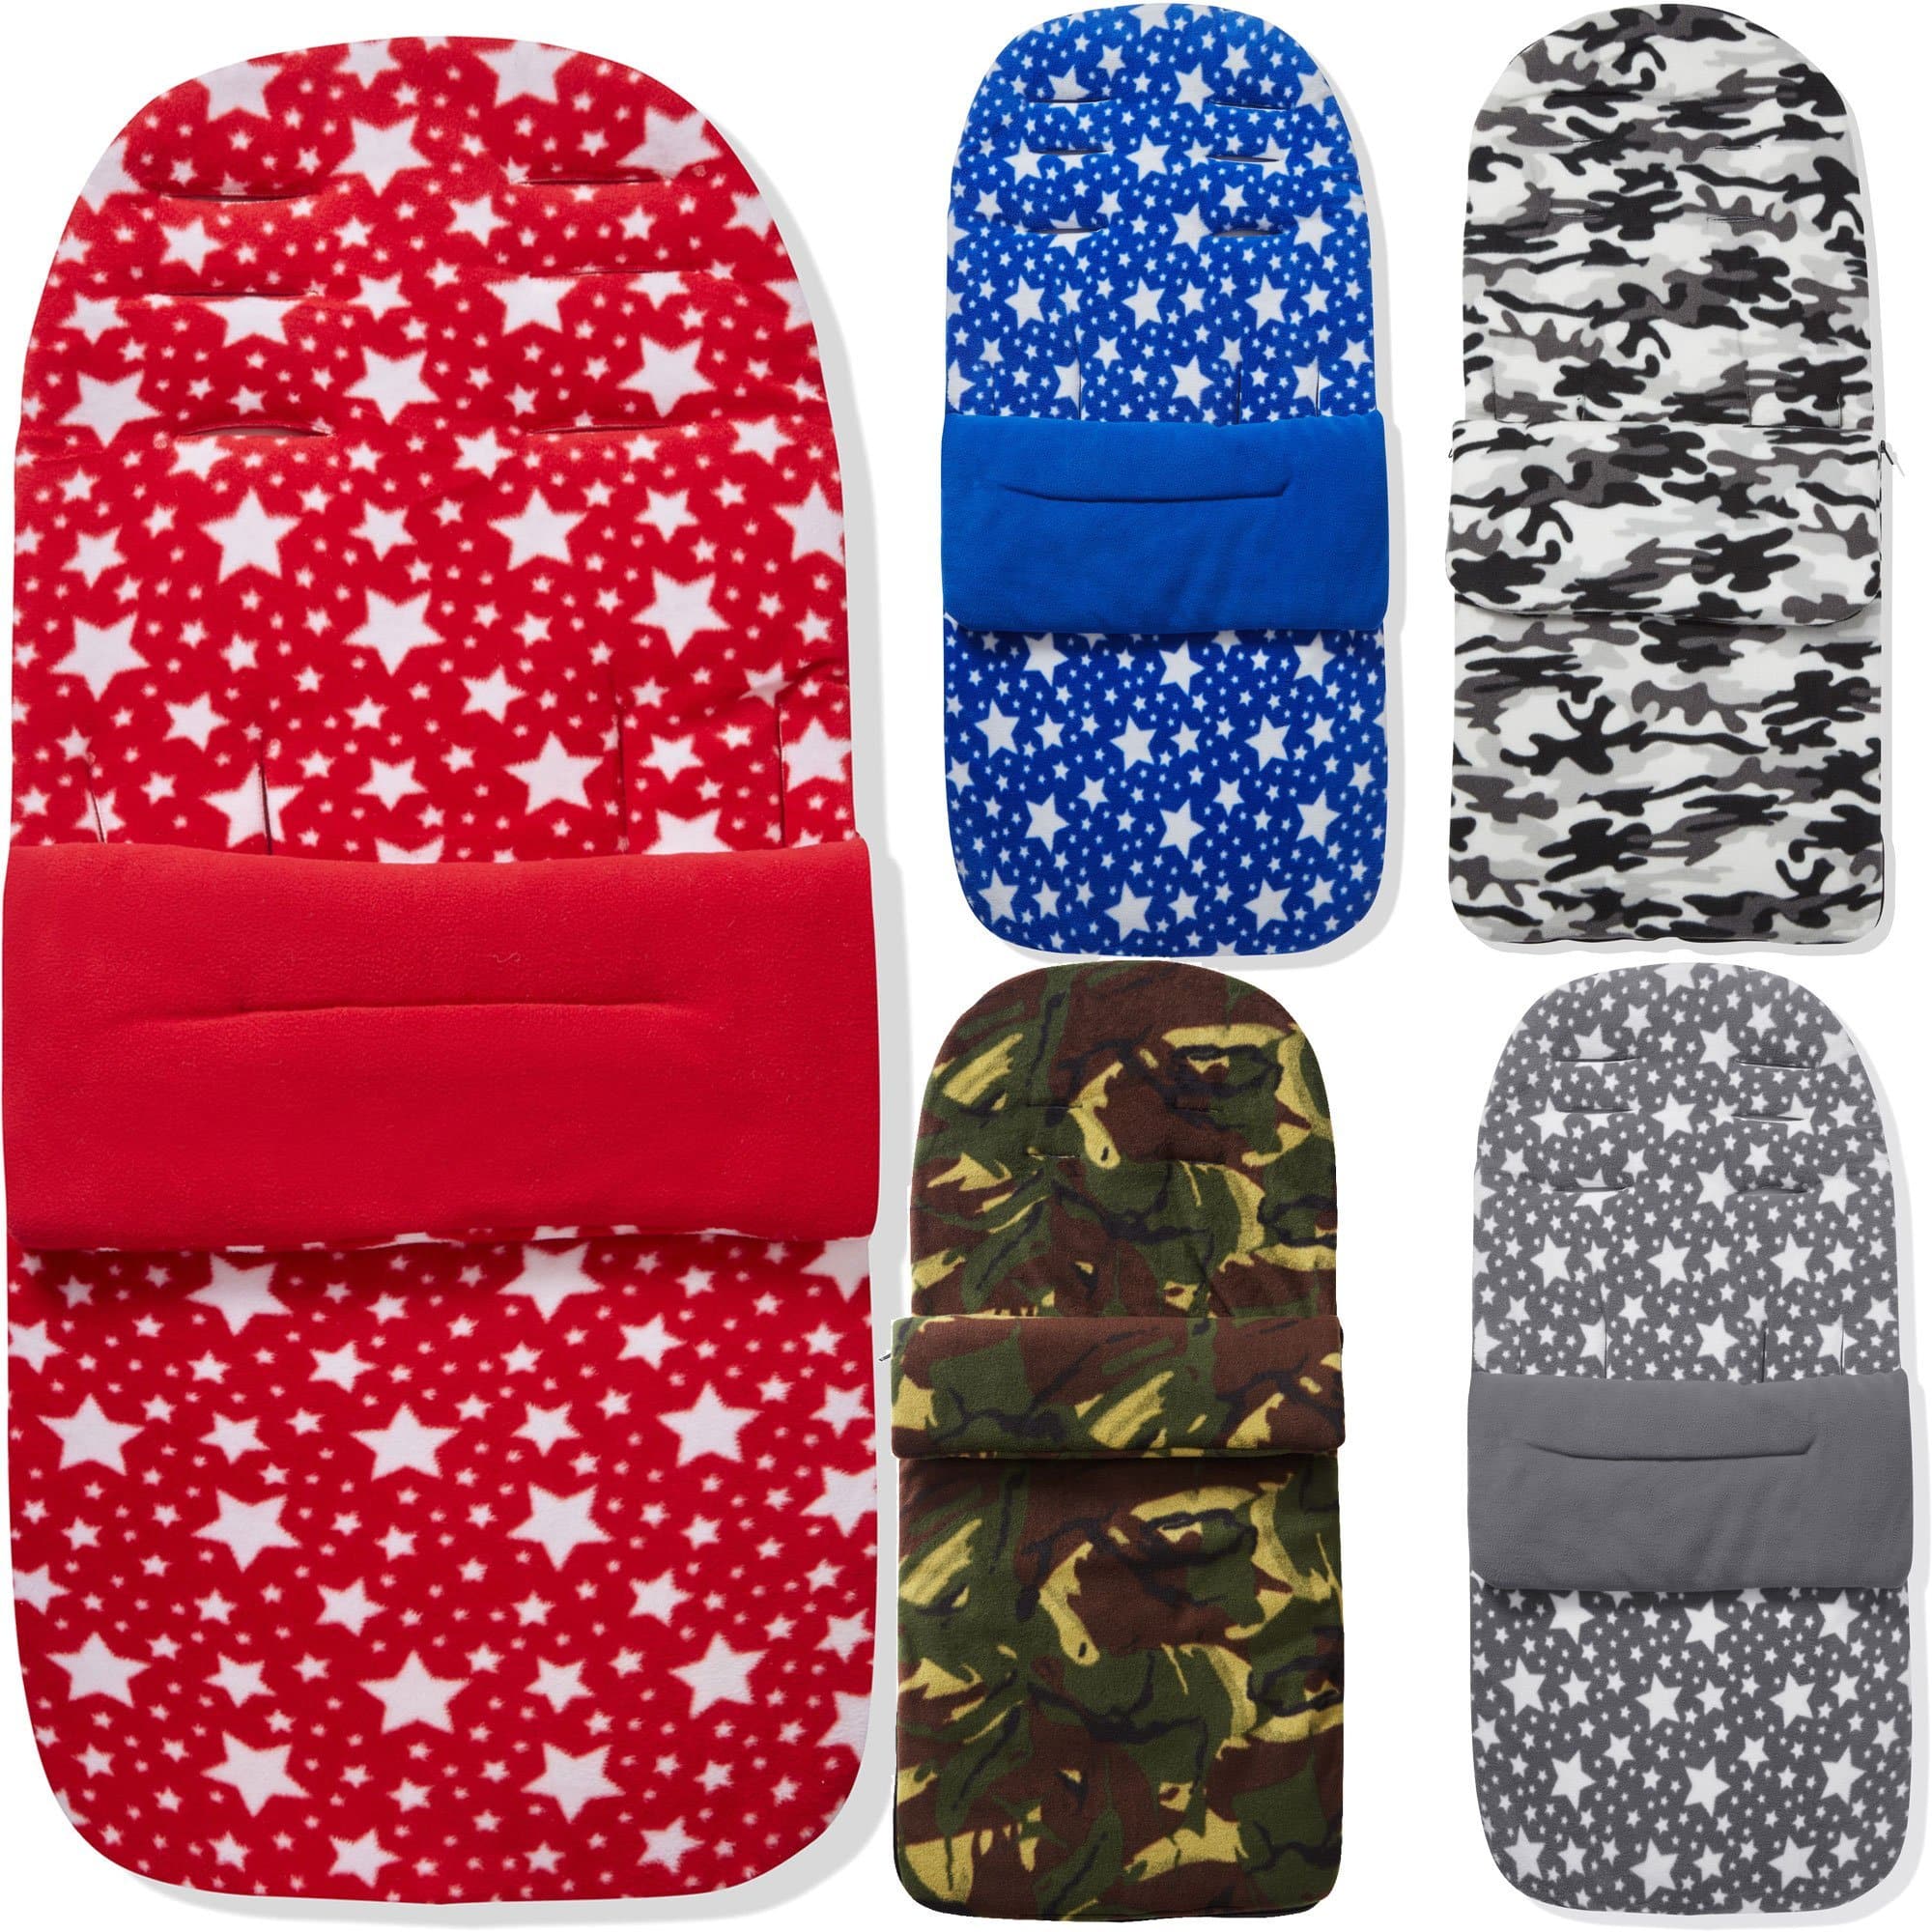 Fleece Footmuff / Cosy Toes Compatible with NeoNato -  | For Your Little One